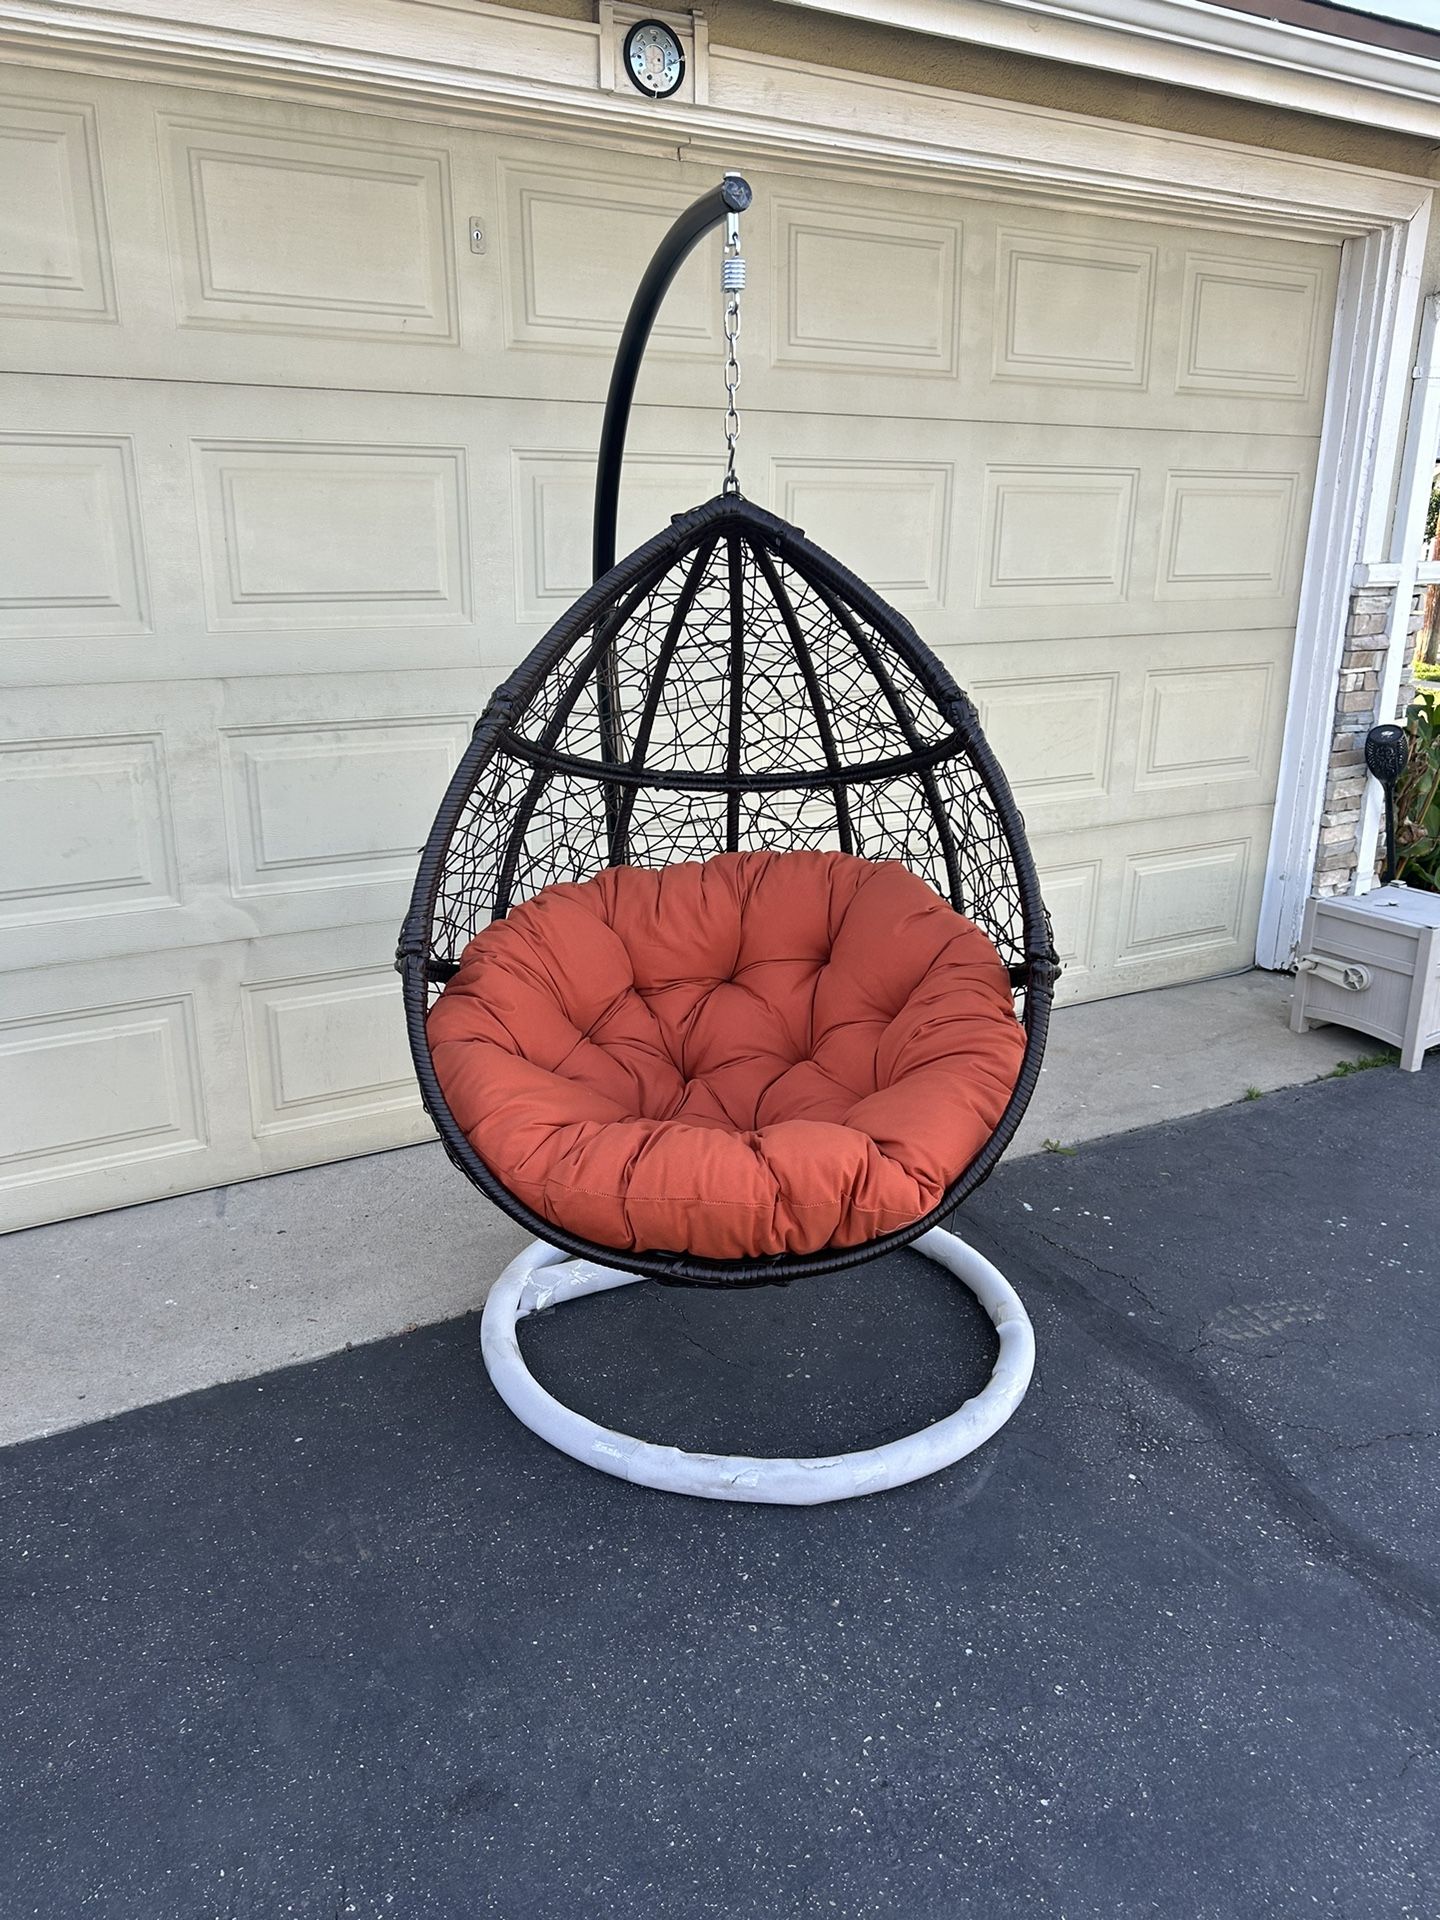 Brand New Hanging Swing Egg Chair With Sunbrella Cushion never Been Used Yet Ready To Go. $280 Firm 